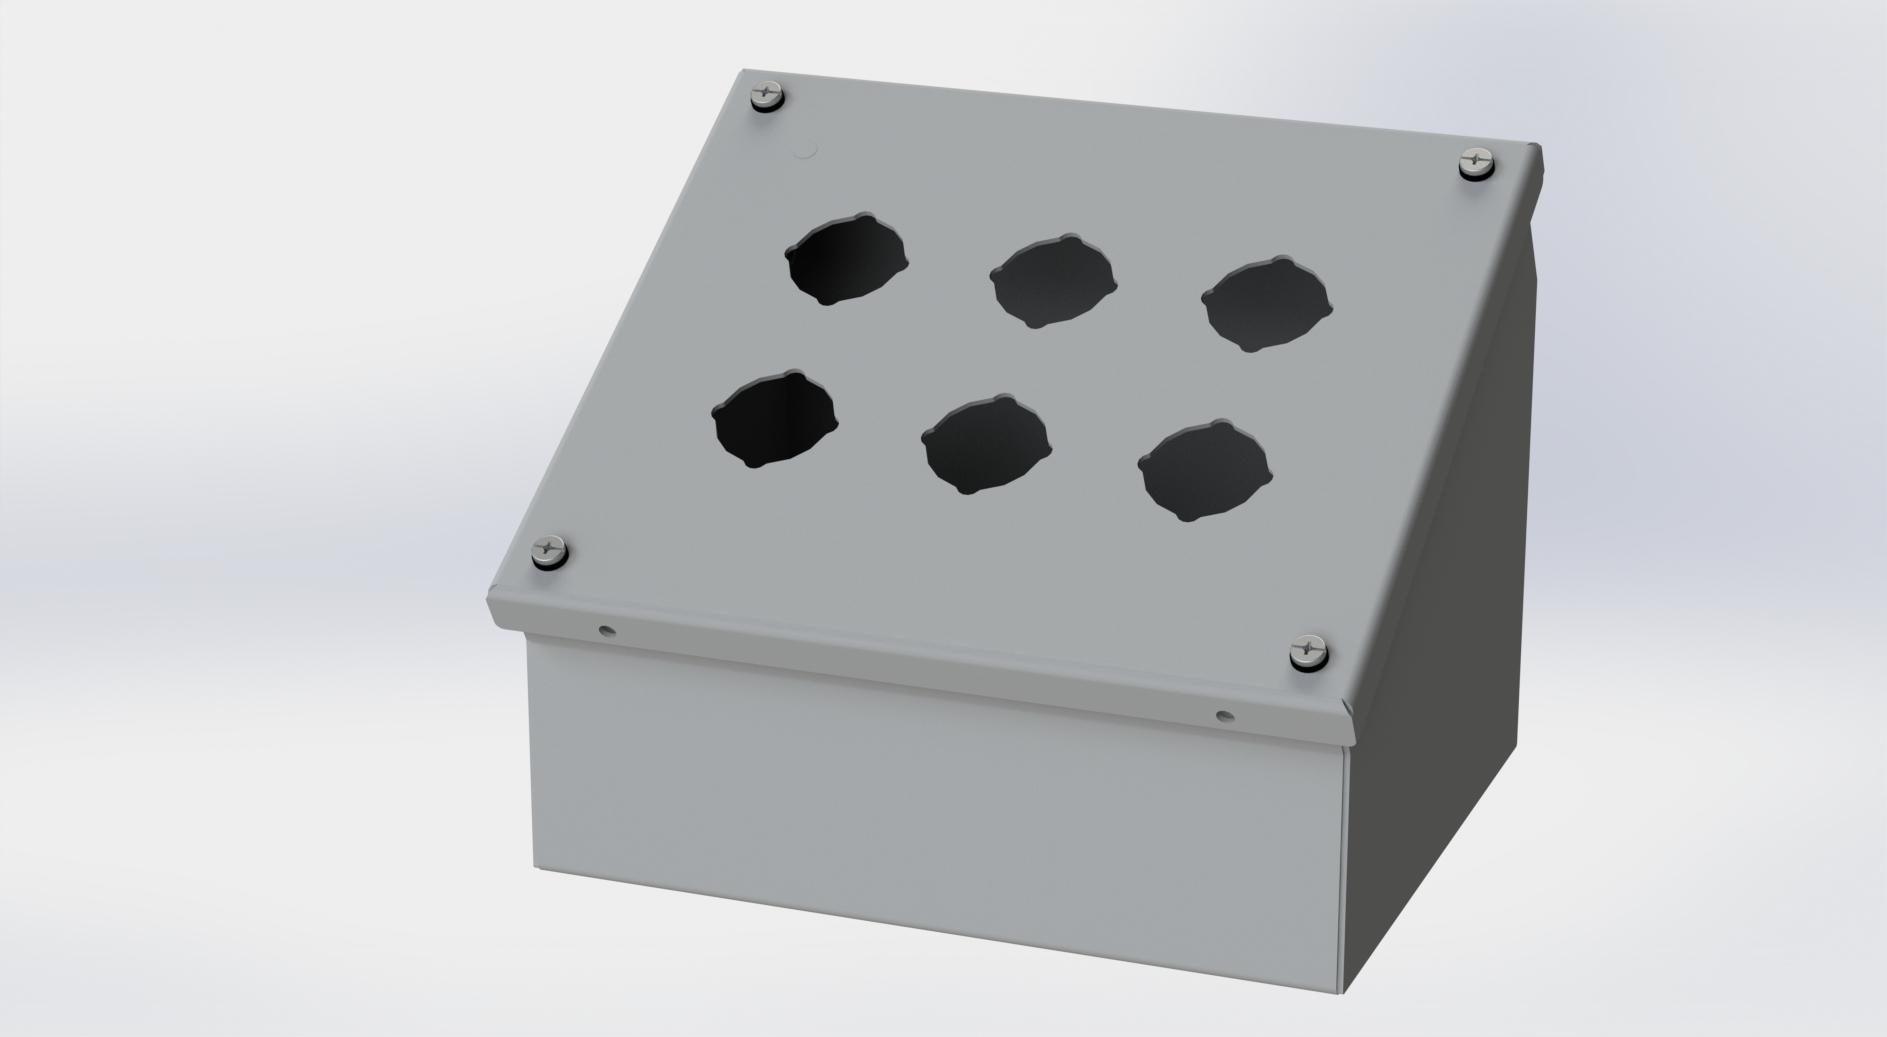 Saginaw Control SCE-6PBA PBA Enclosure, Height:7.25", Width:8.50", Depth:6.75", ANSI-61 gray powder coating inside and out.